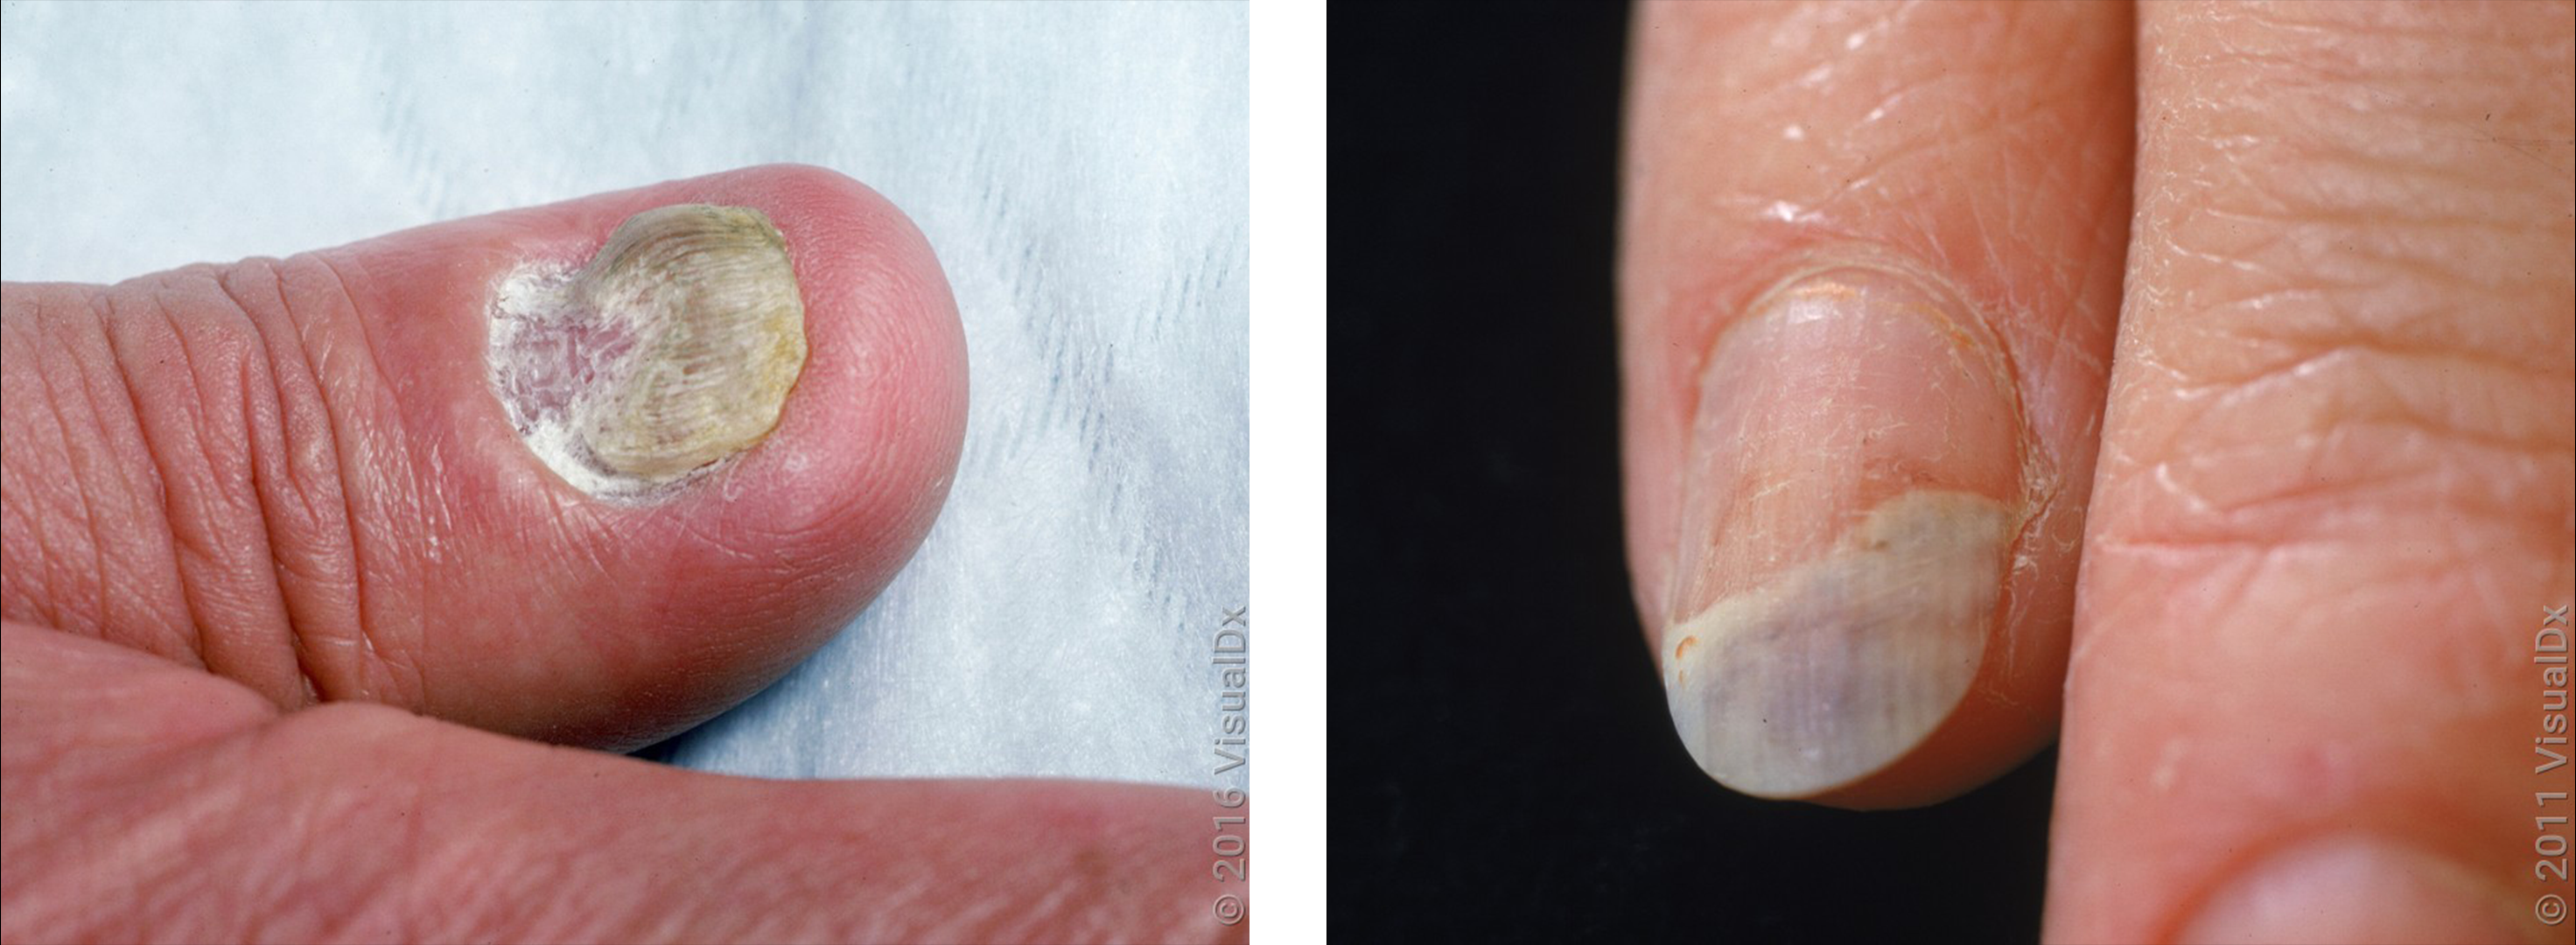 What Is Onychomycosis (Nail Fungus), and What Does It Look Like? - GoodRx